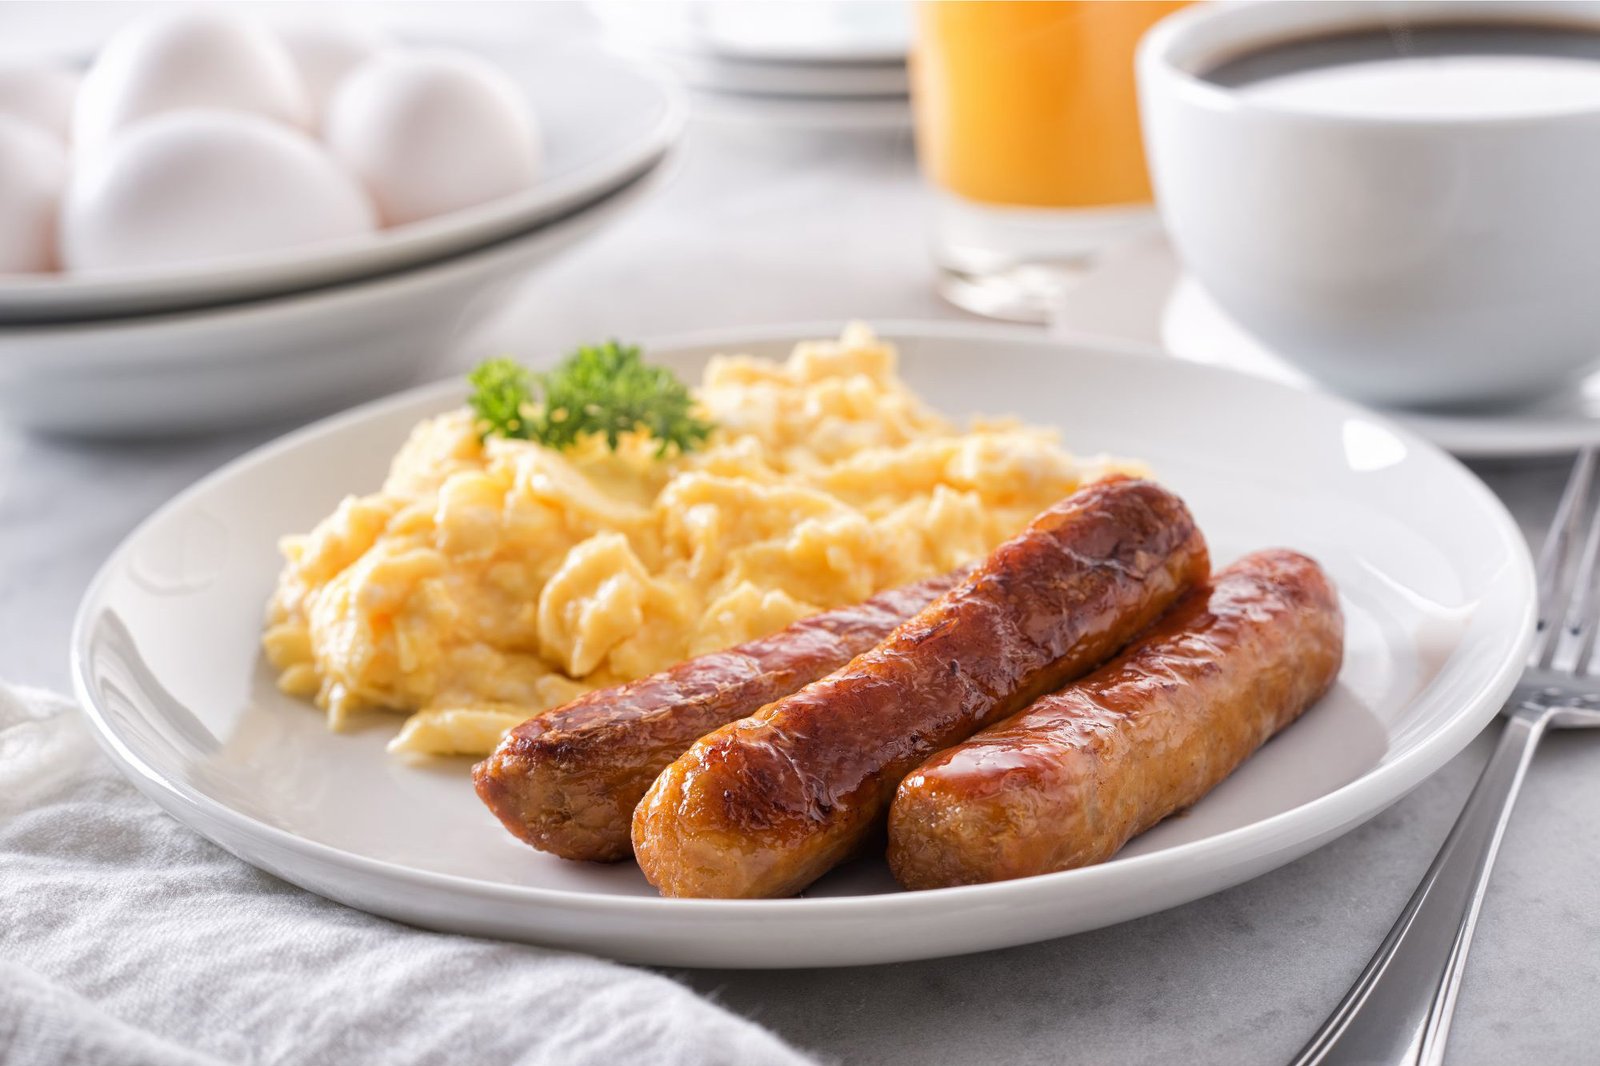 New Research Reveals That a Protein-Rich Breakfast Can Increase Satiety and Improve Concentration